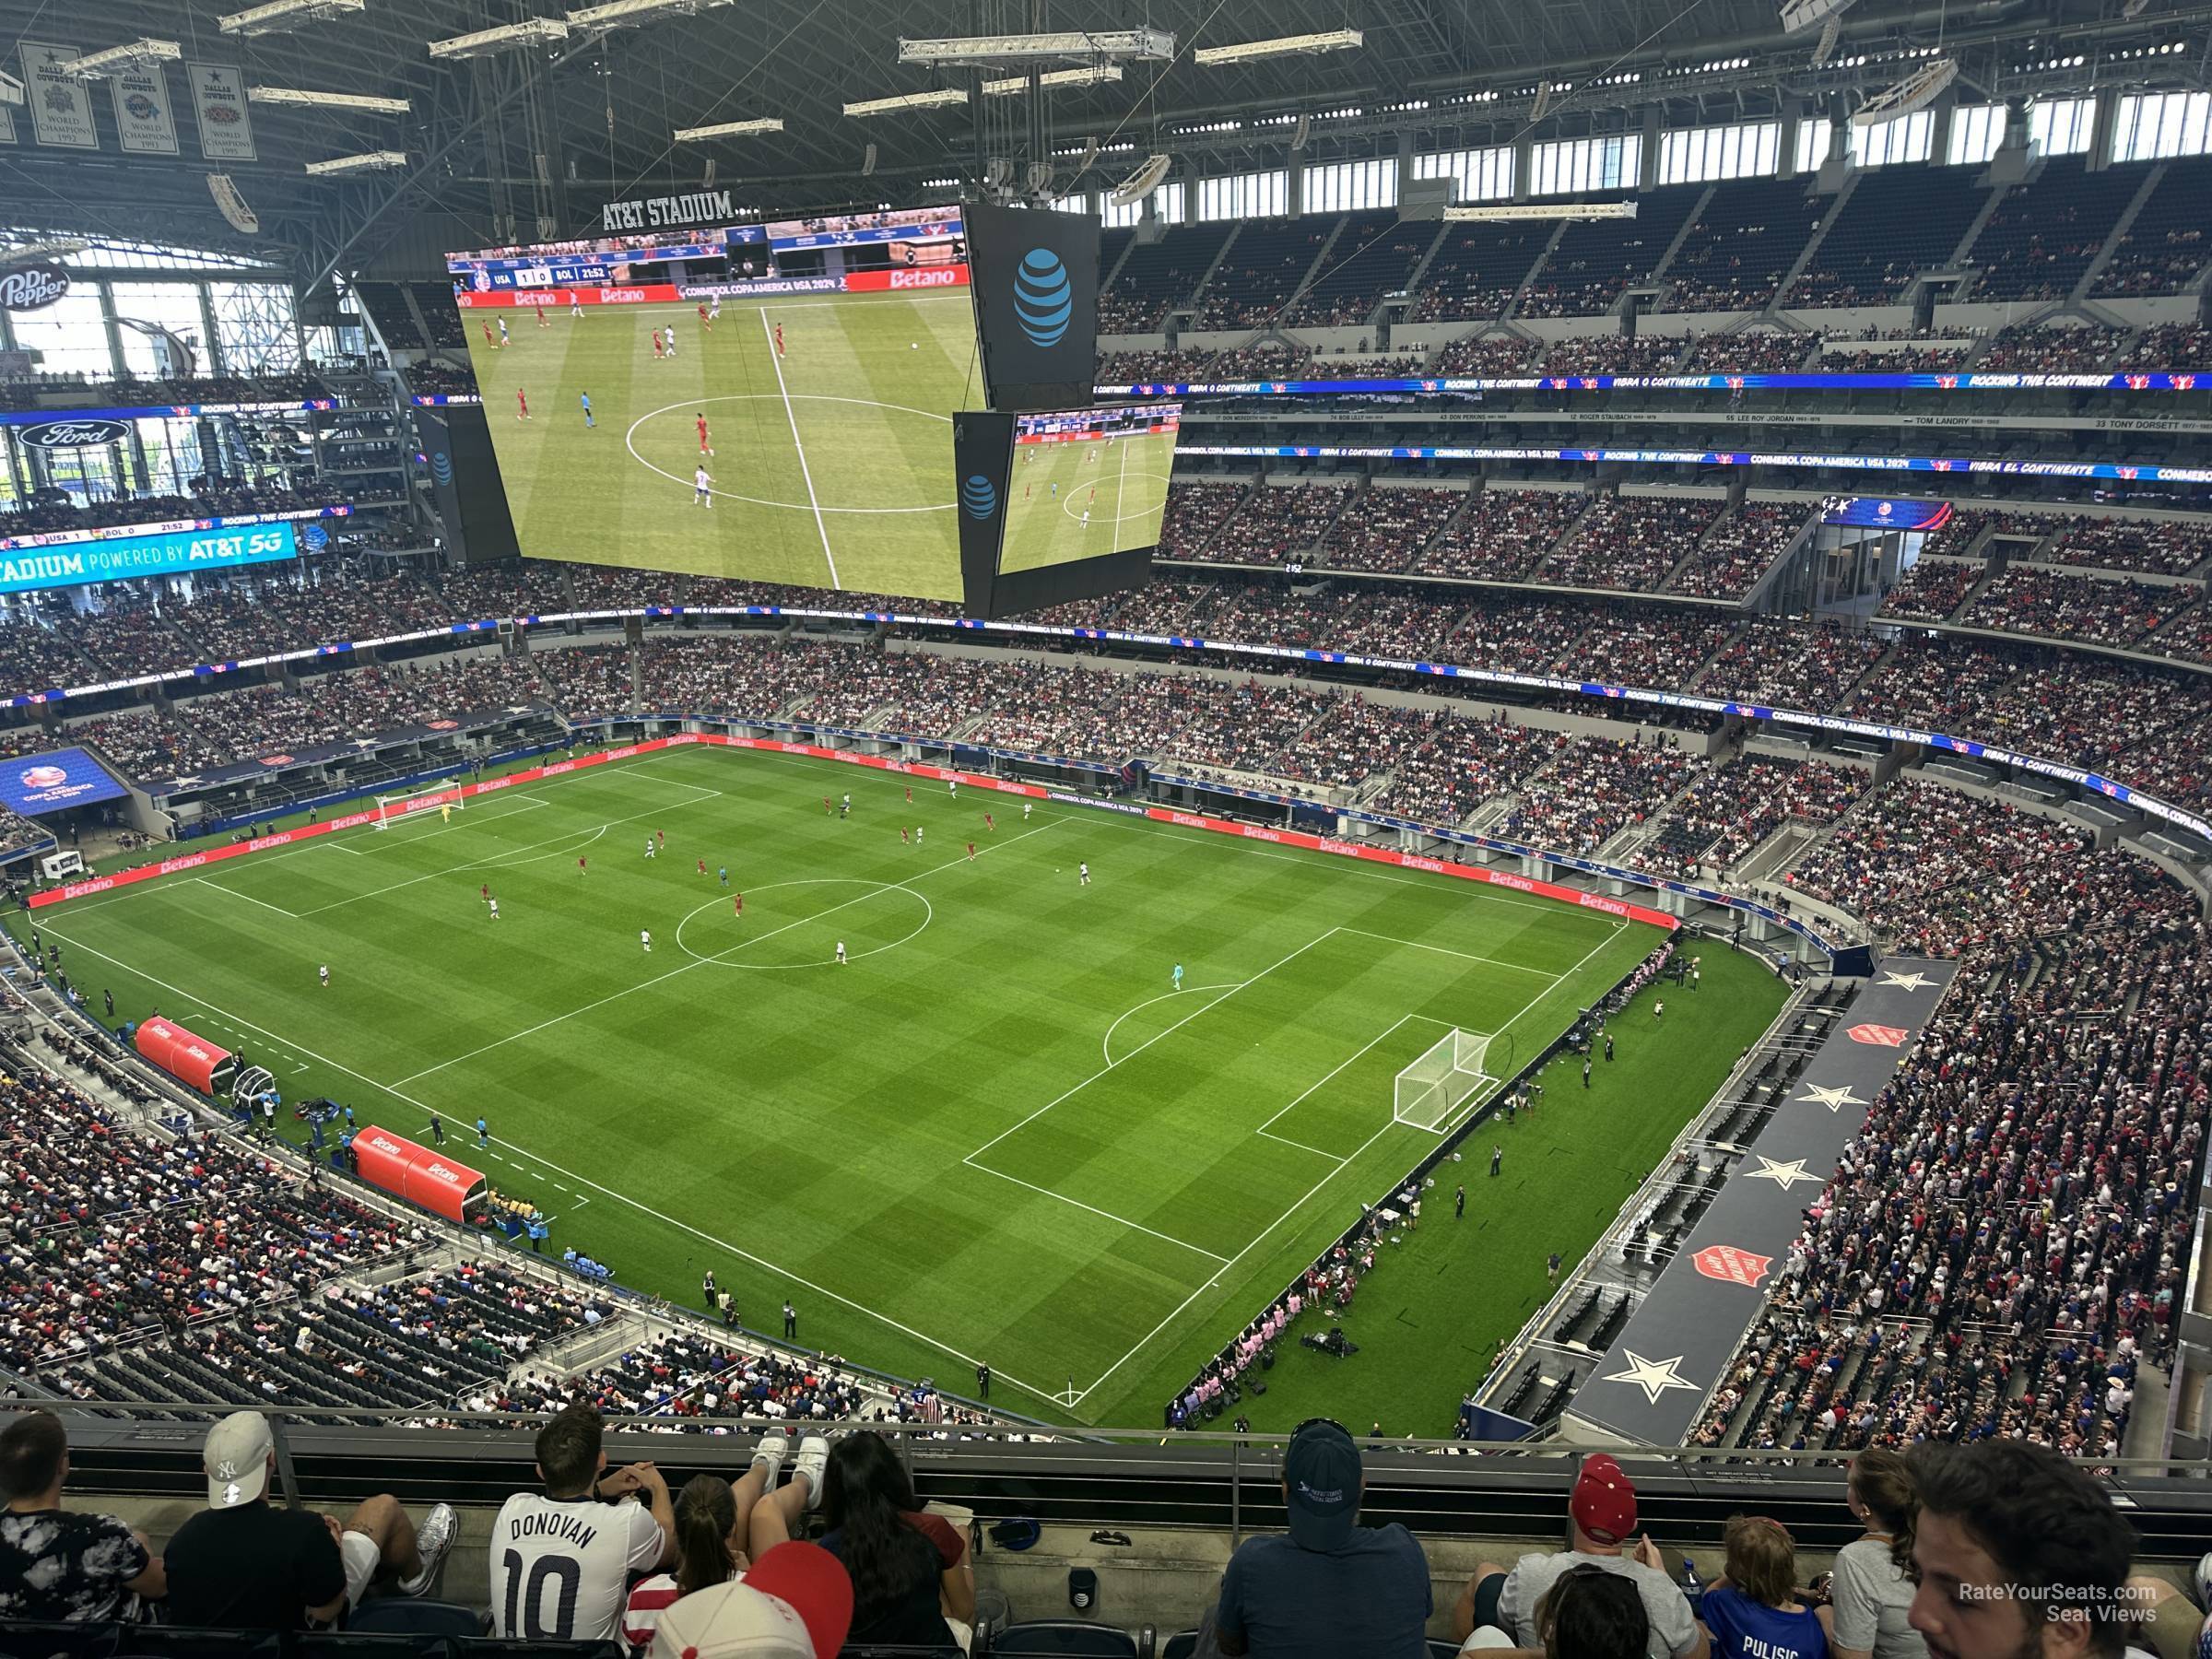 section 436, row 6 seat view  for soccer - at&t stadium (cowboys stadium)